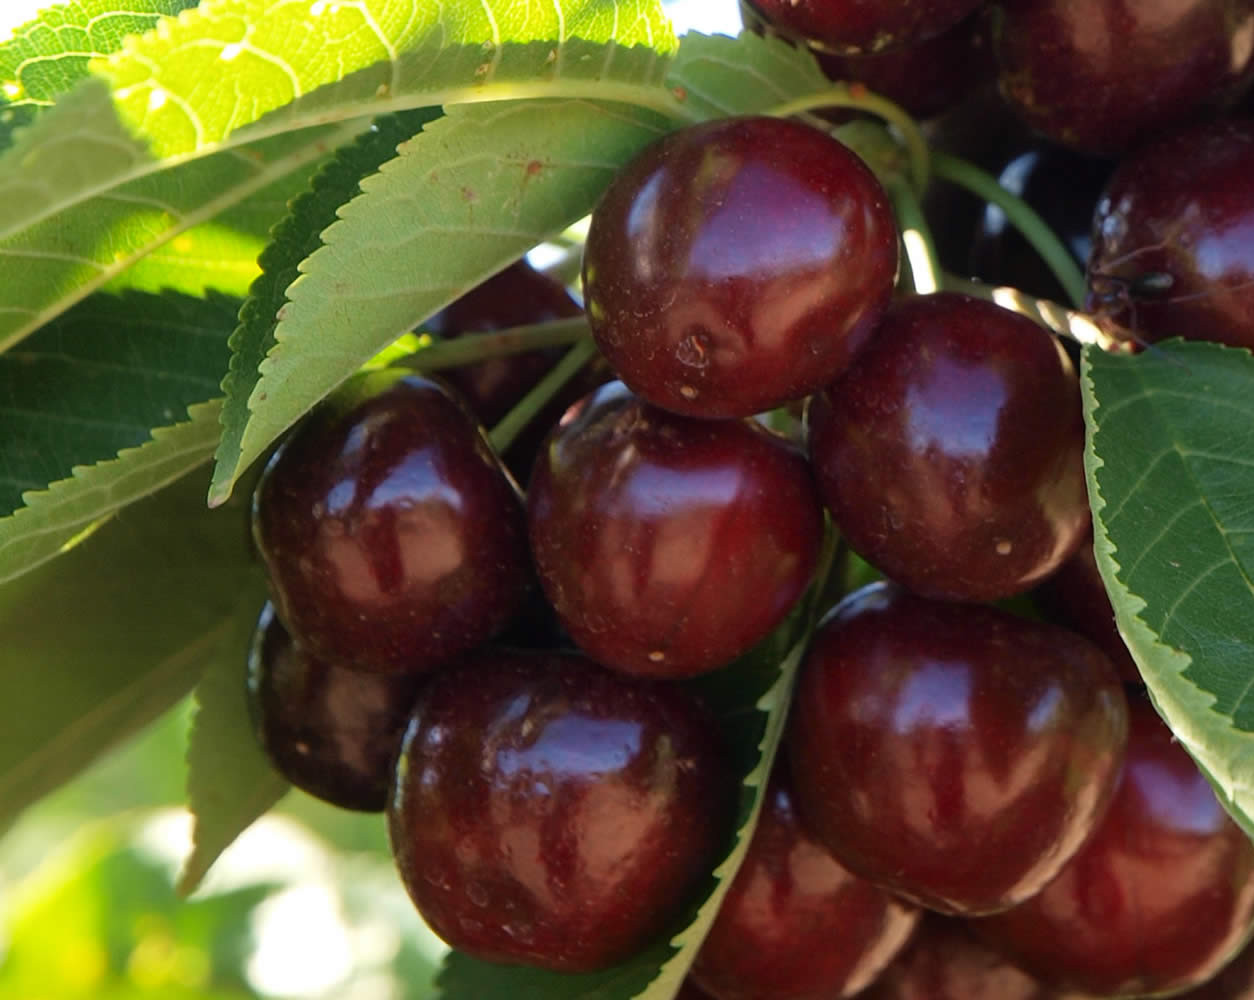 Cherry Growers Australia reports exports up 43% at end of season, thanks in part to India partnership